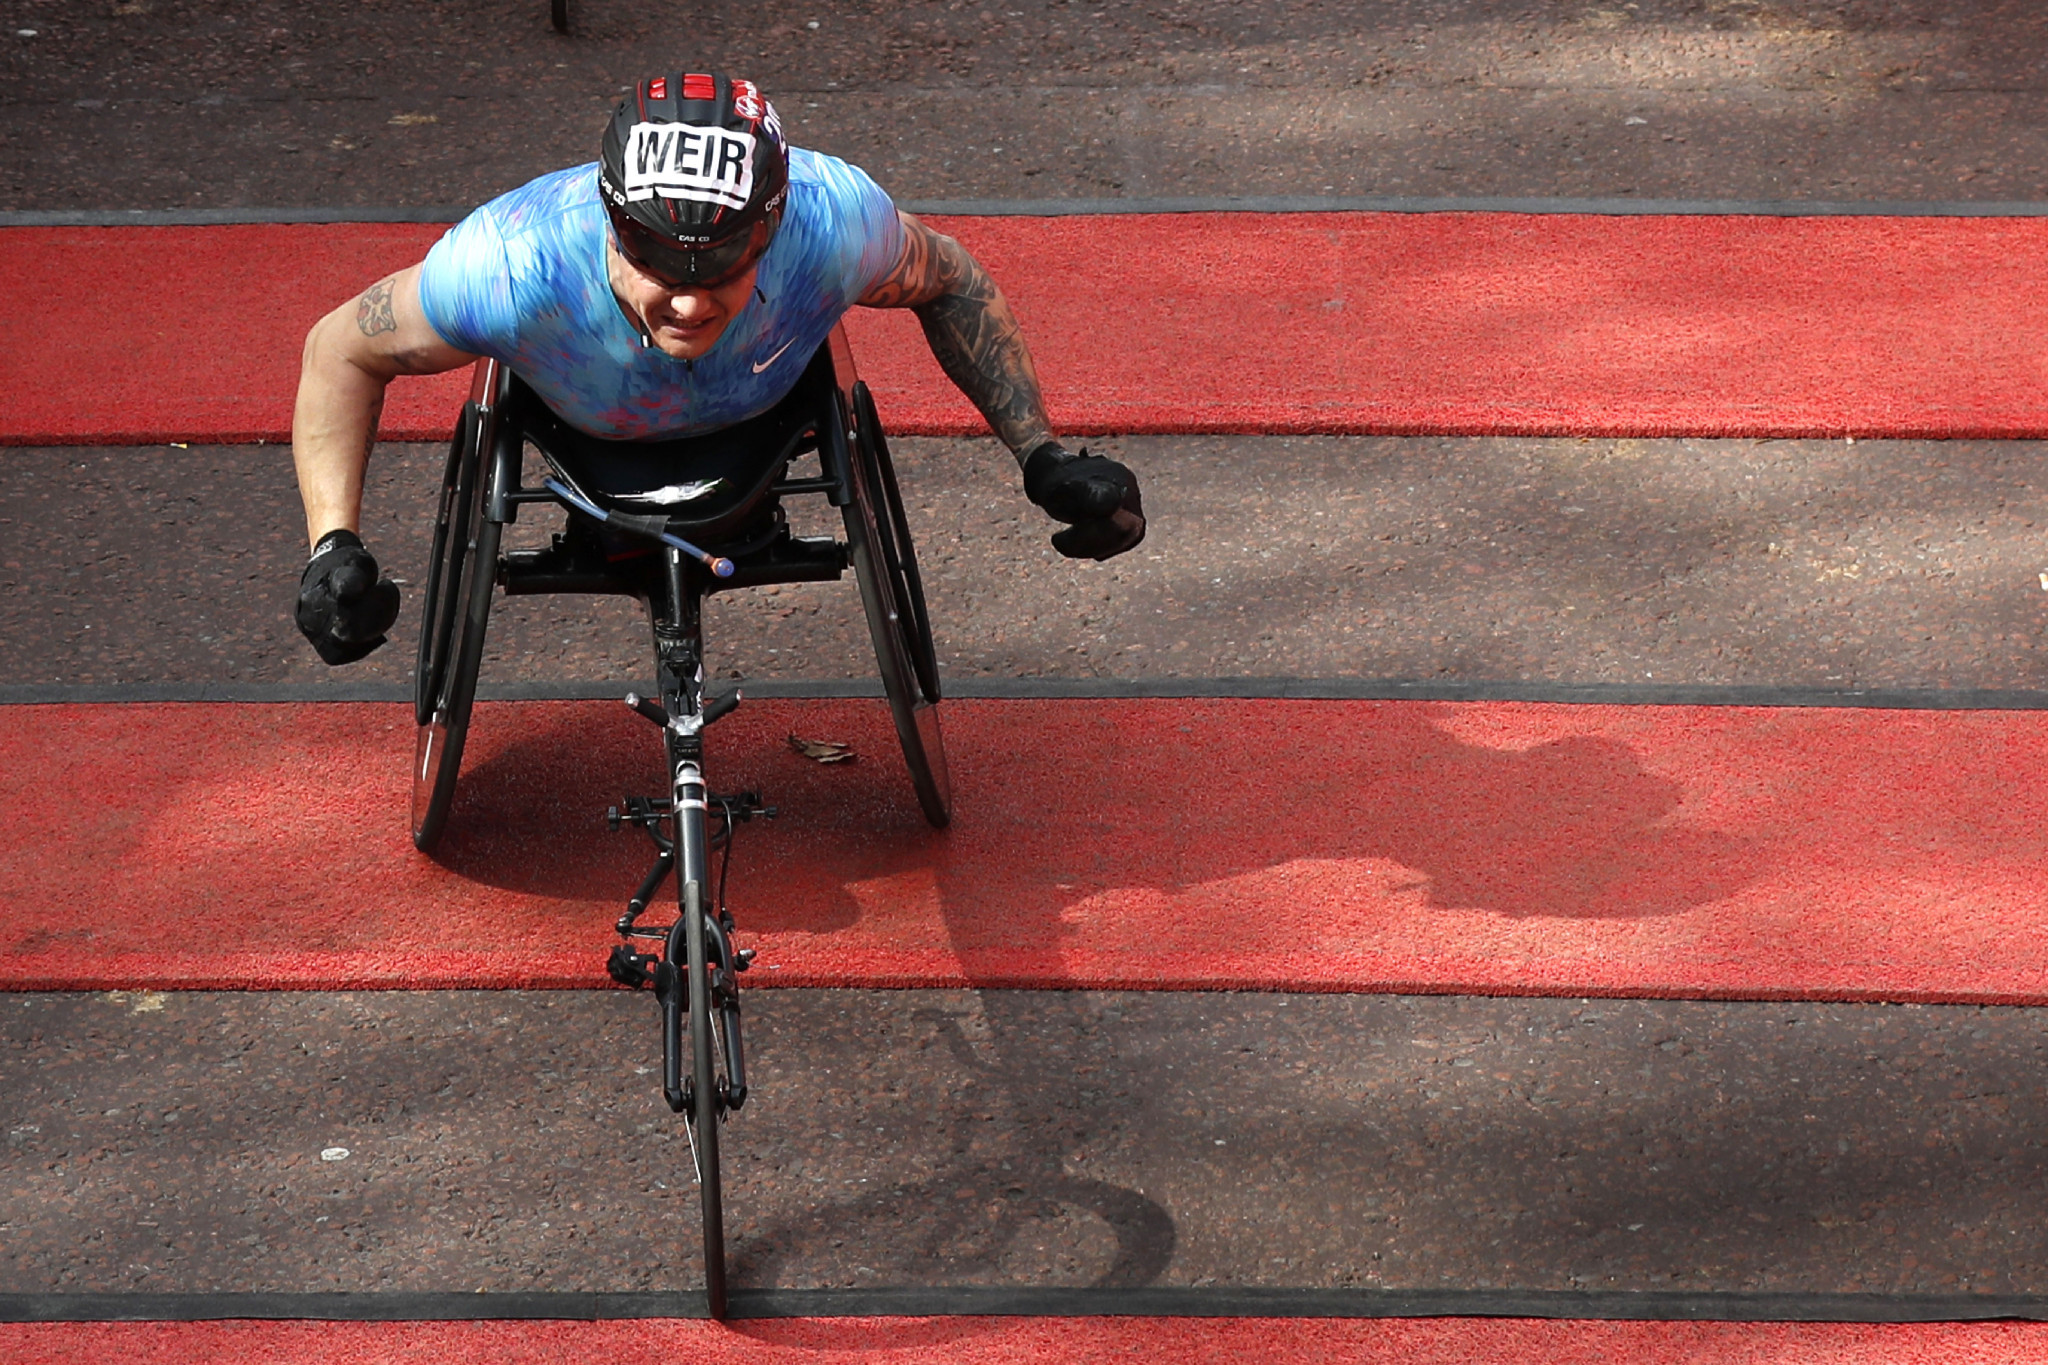 Defending men's Virgin London Marathon wheelchair champion David Weir claims he is relishing the task of competing for himself rather than as part of the British setup ©Getty Images